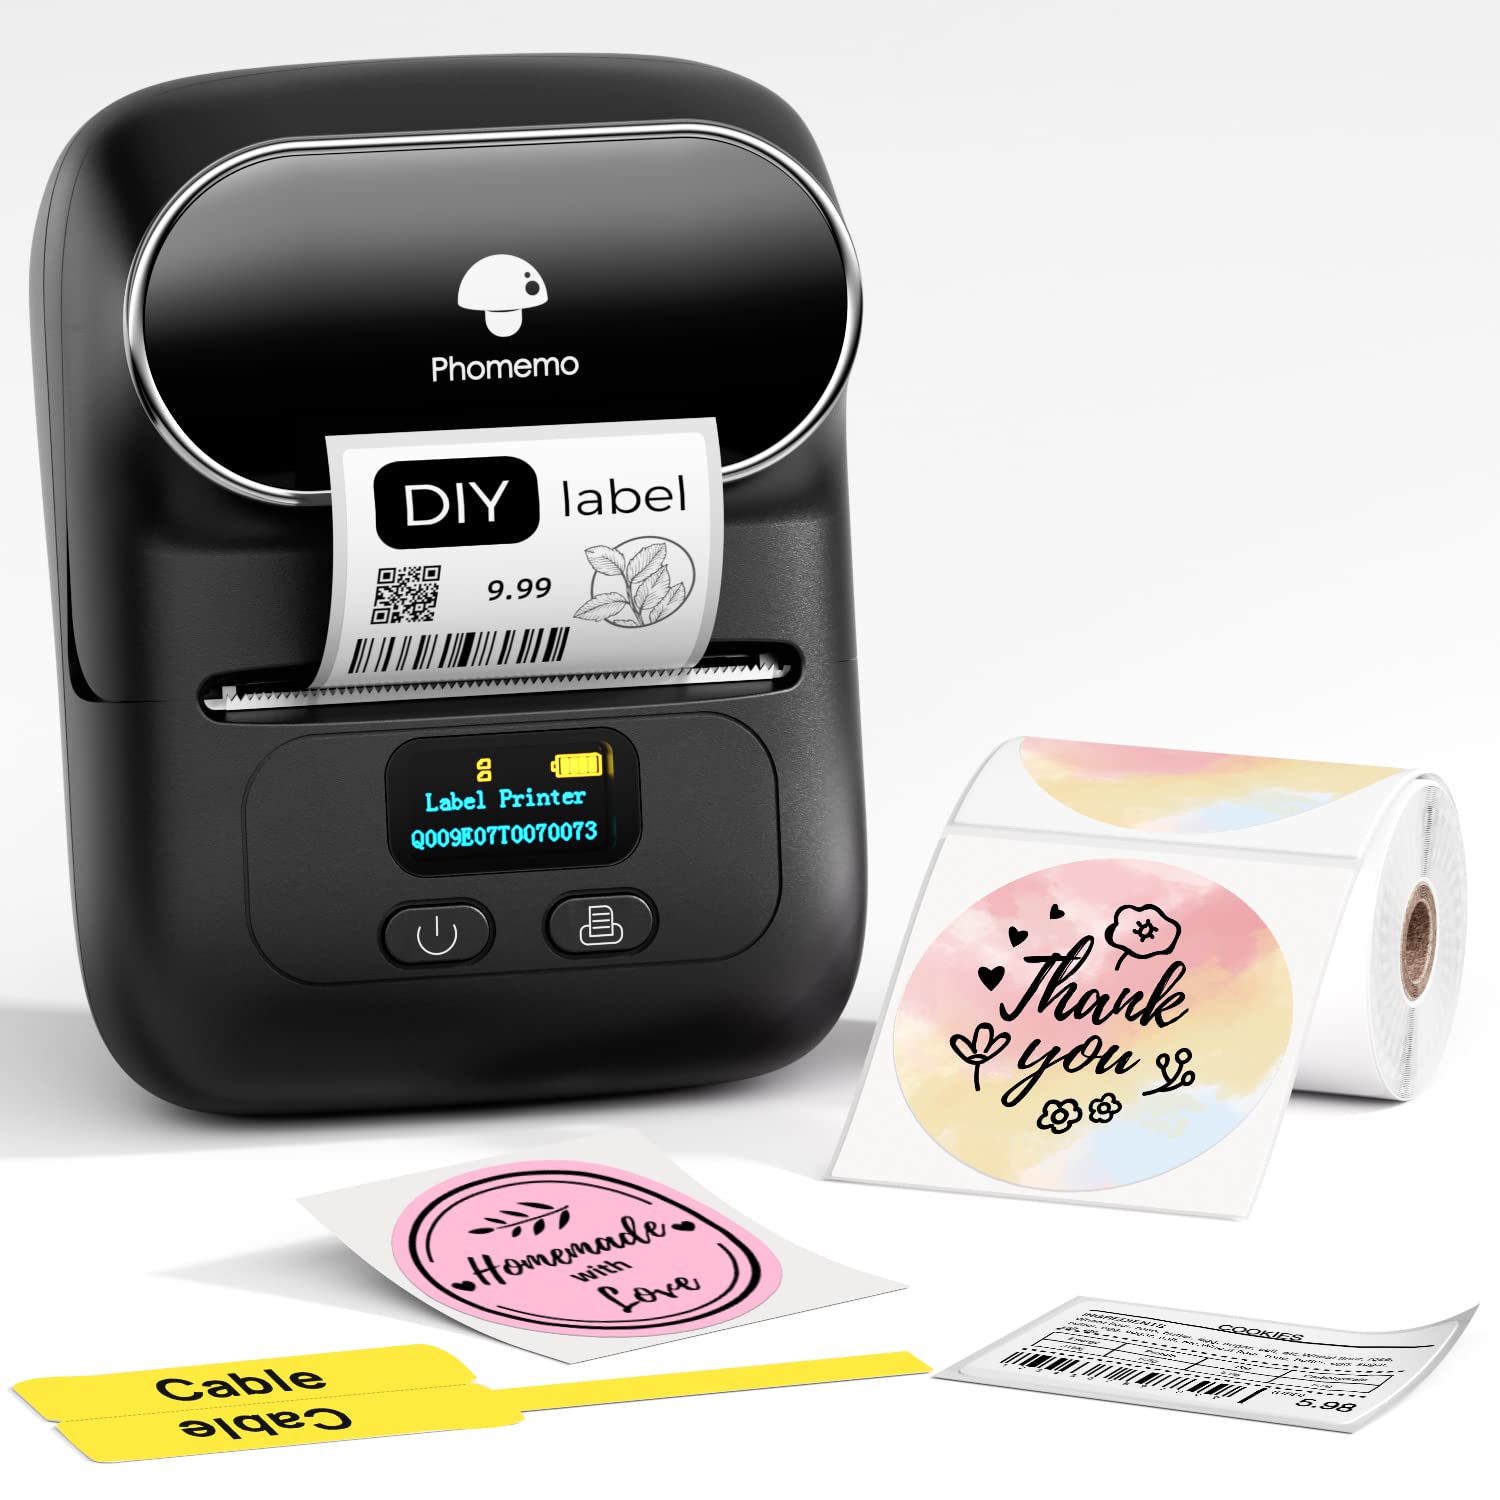 How Do I Pick the Best Bluetooth Label Printer?